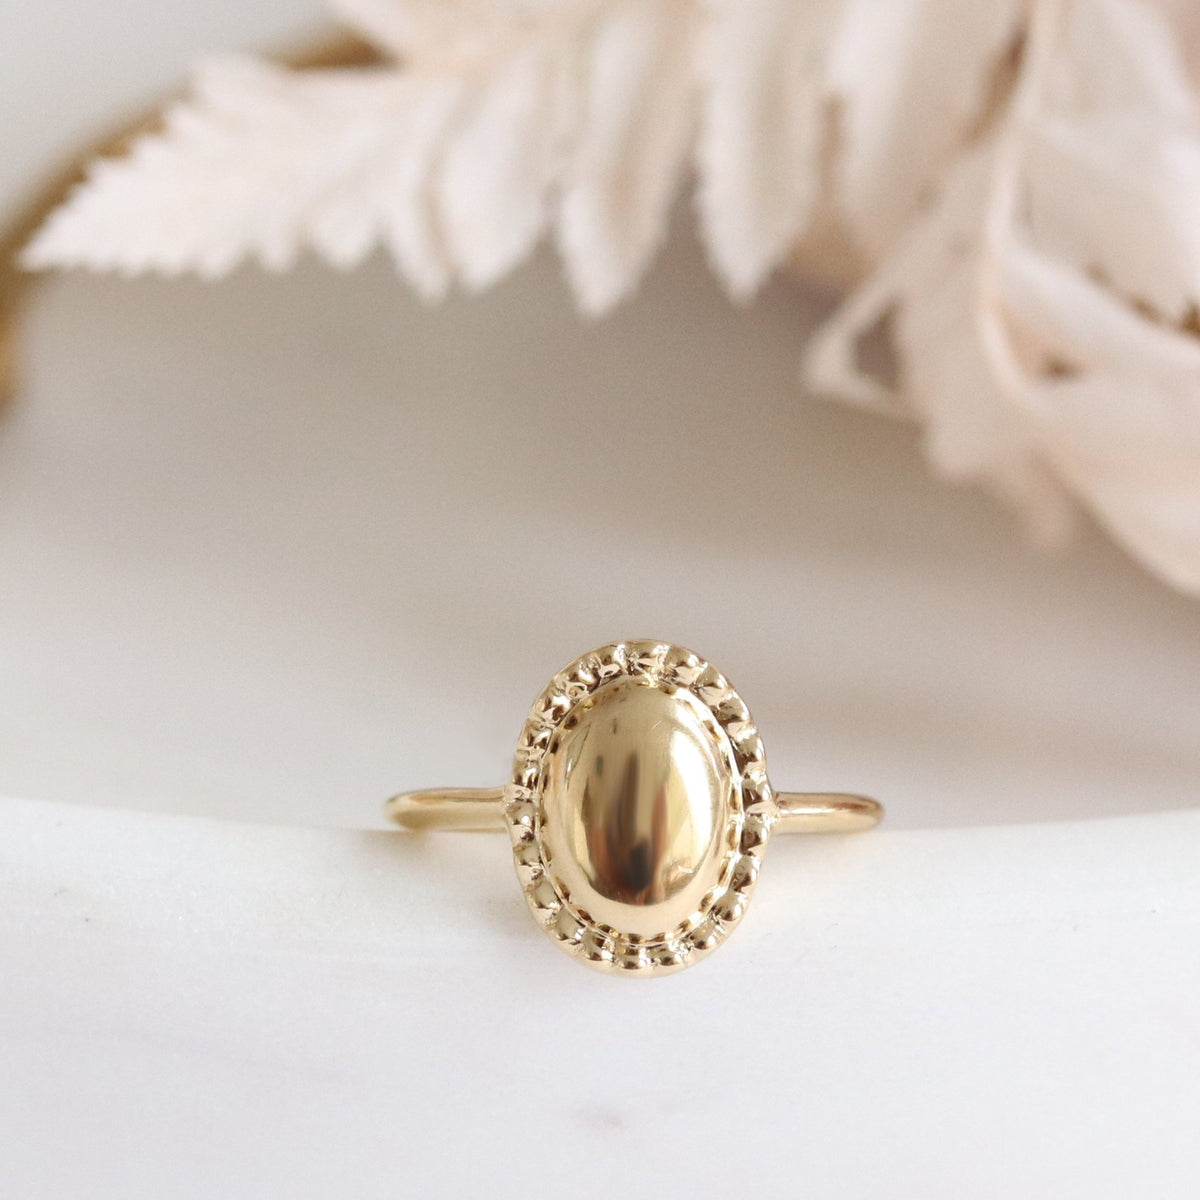 MINI BELIEVE SOLEIL OVAL RING - GOLD - SO PRETTY CARA COTTER